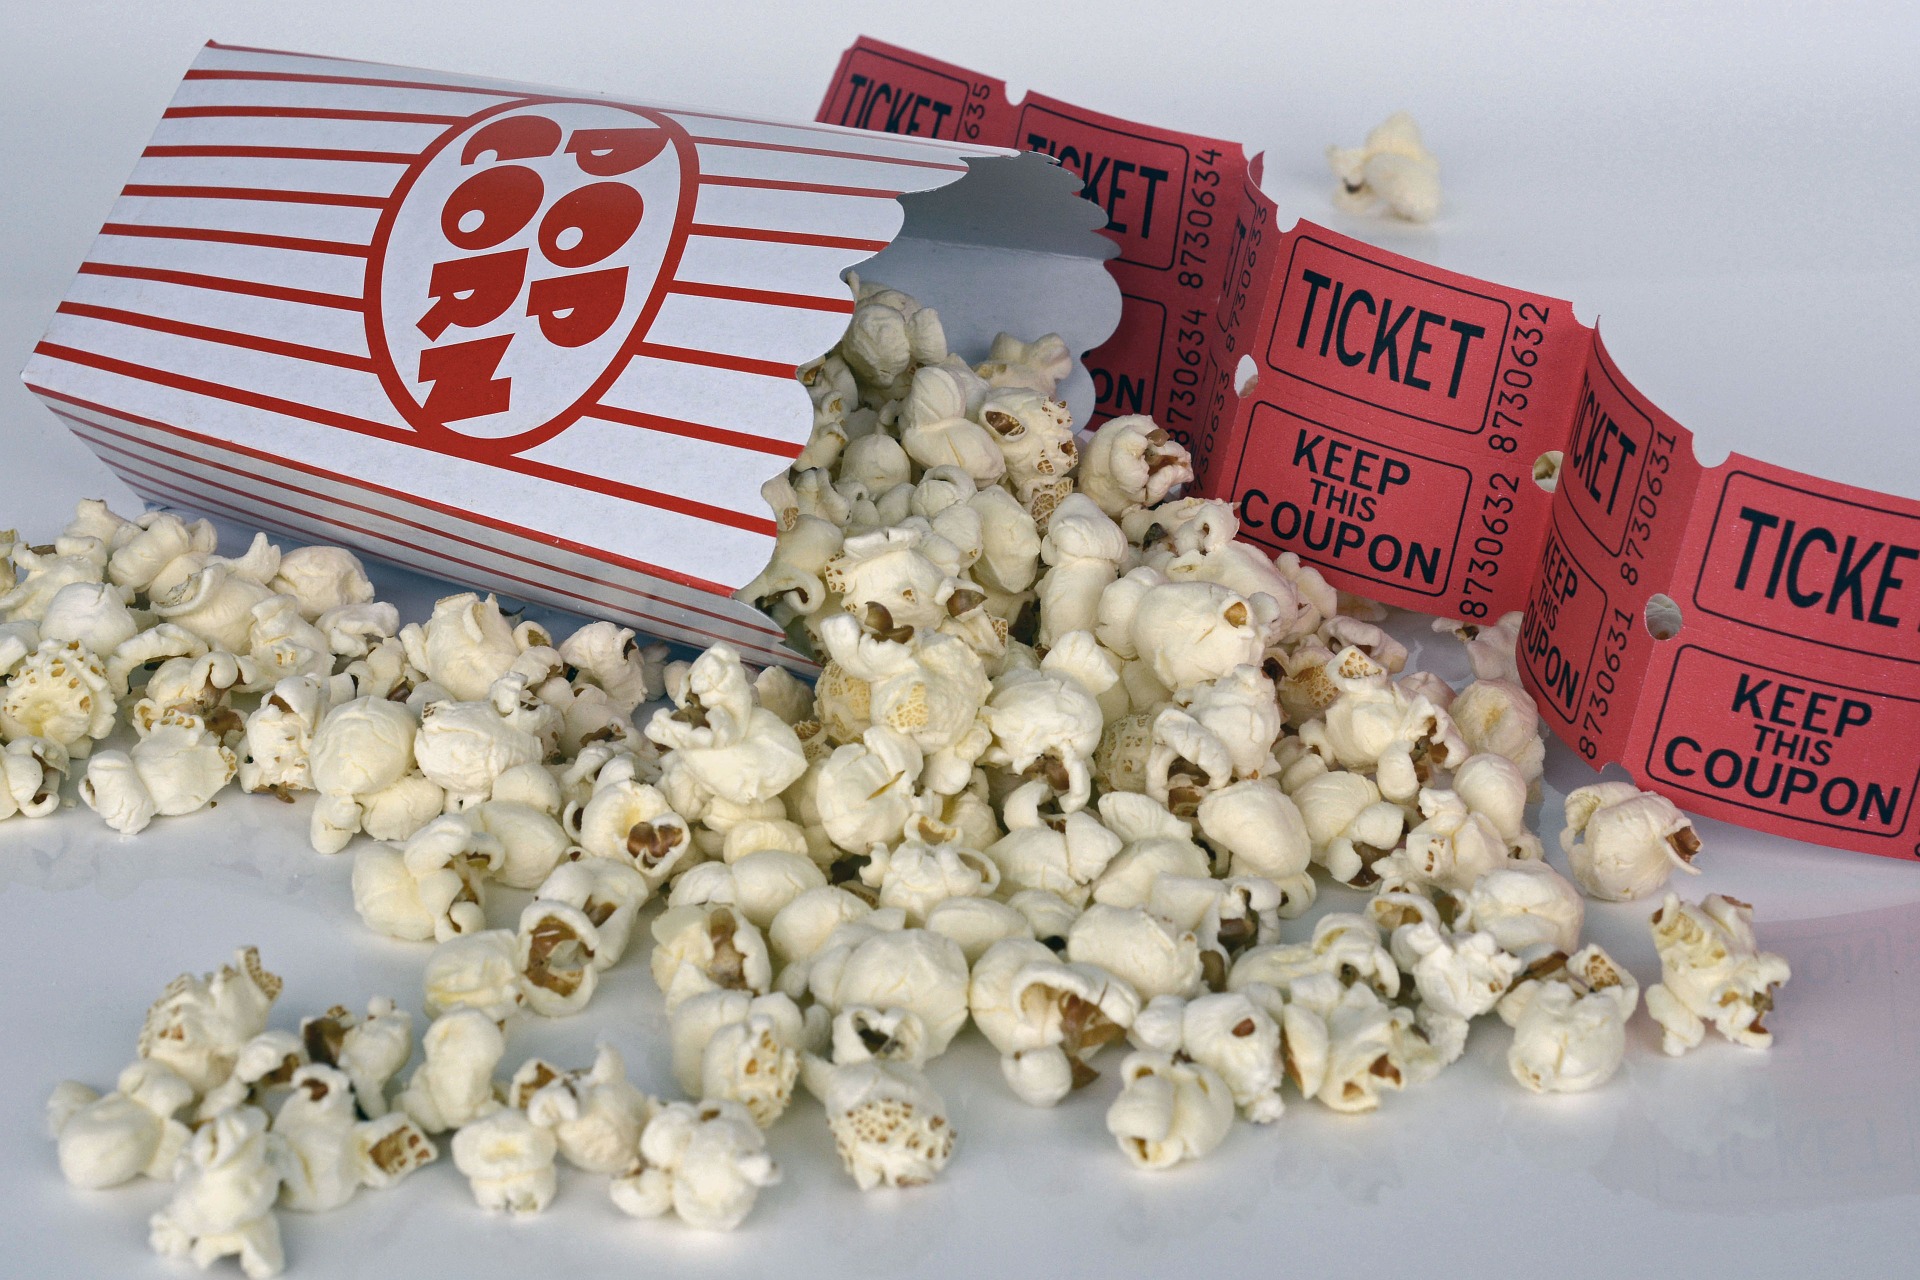 popcorn-1433326_1920 (c) Image by annca from Pixabay